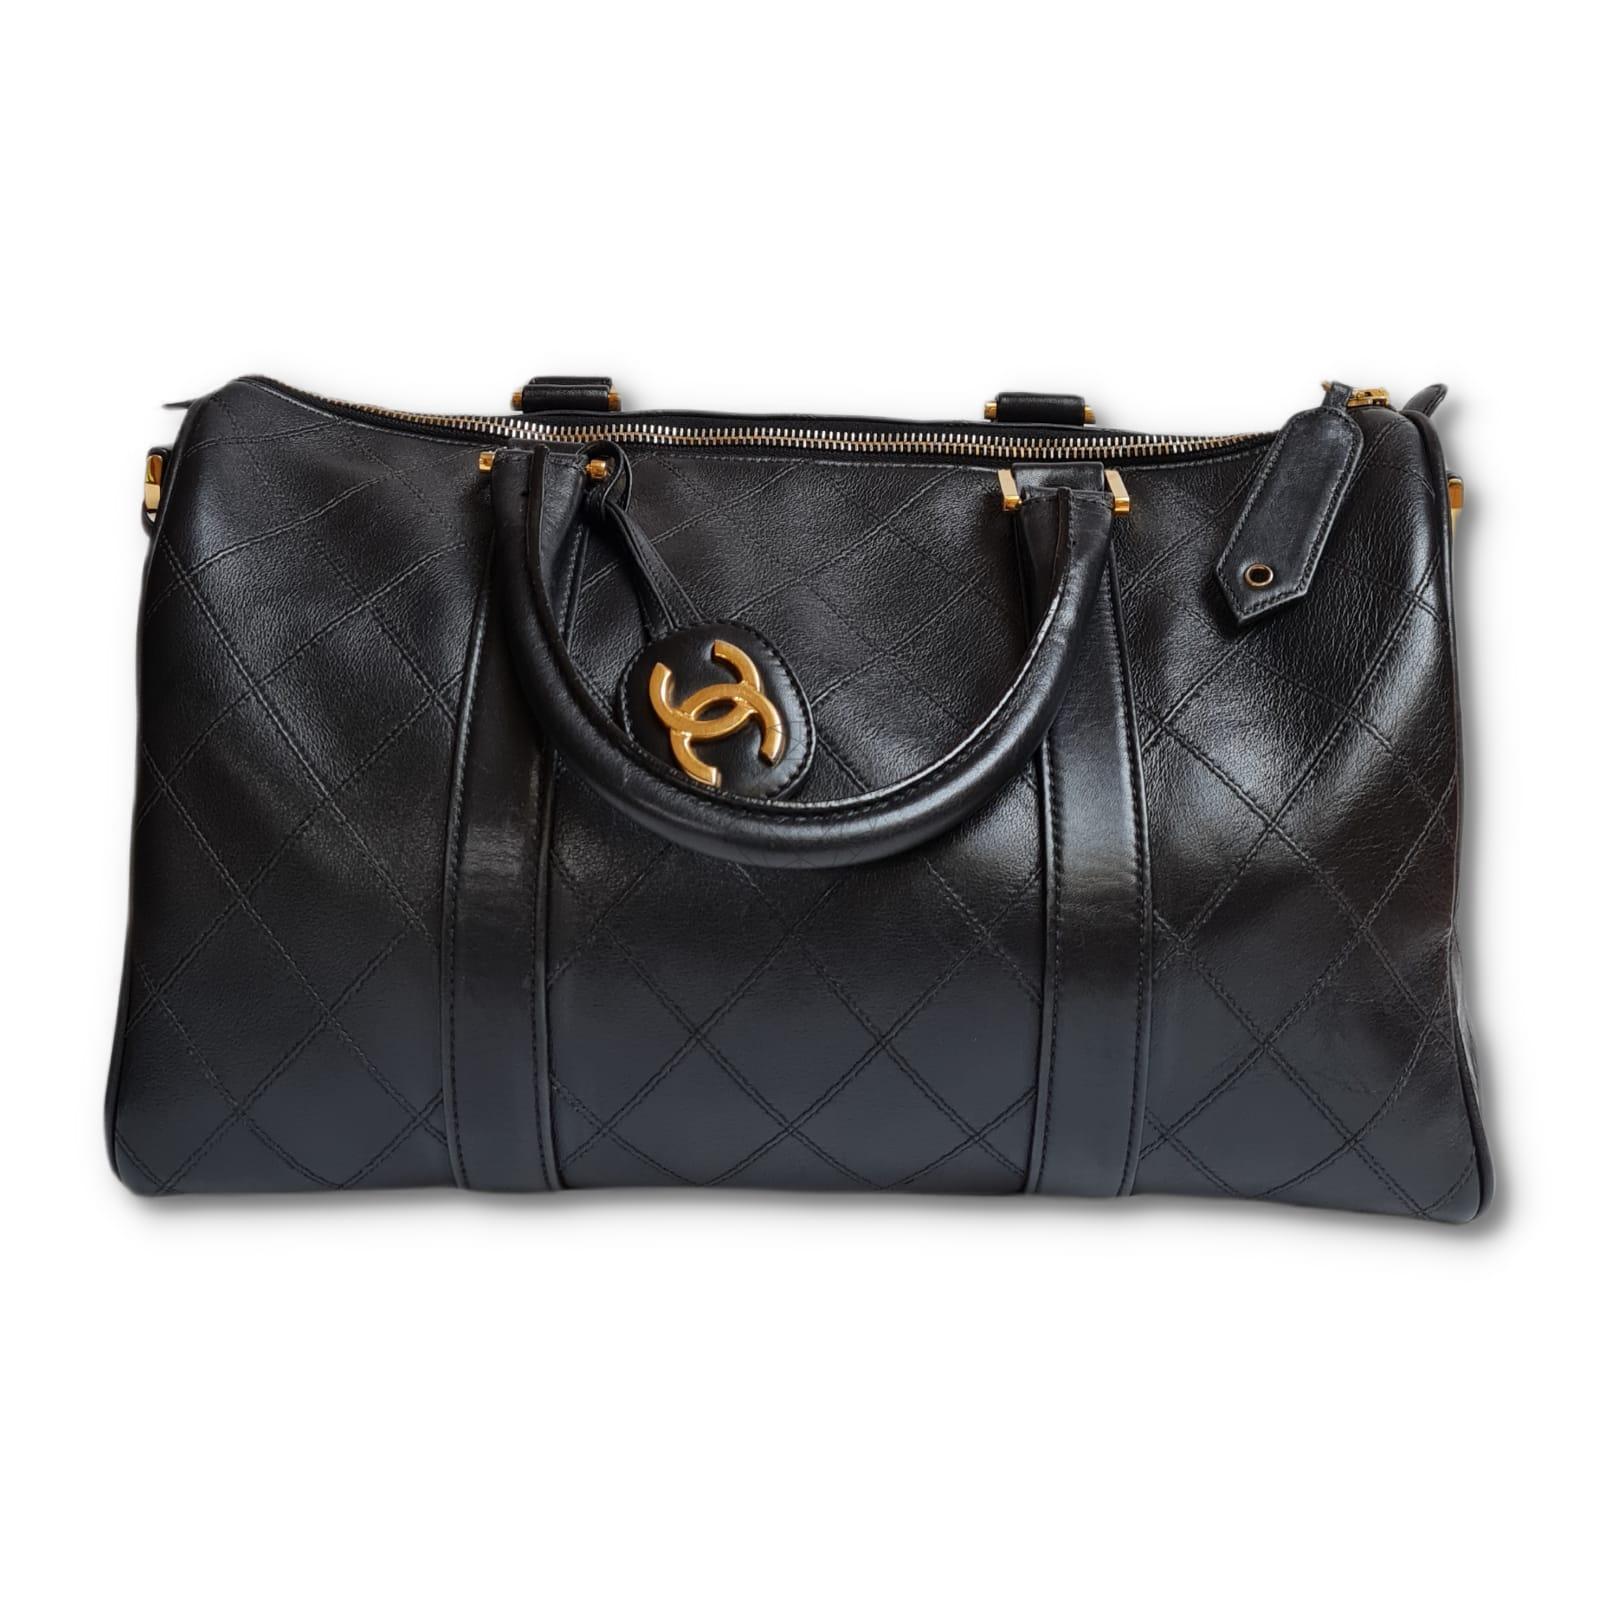 Beautiful chanel vintage boston bag in quilted leather. Overall in great condition, with minor touch ups on the corners. Item is missing its strap. Series #4. Comes as it is with its leather tag attached.